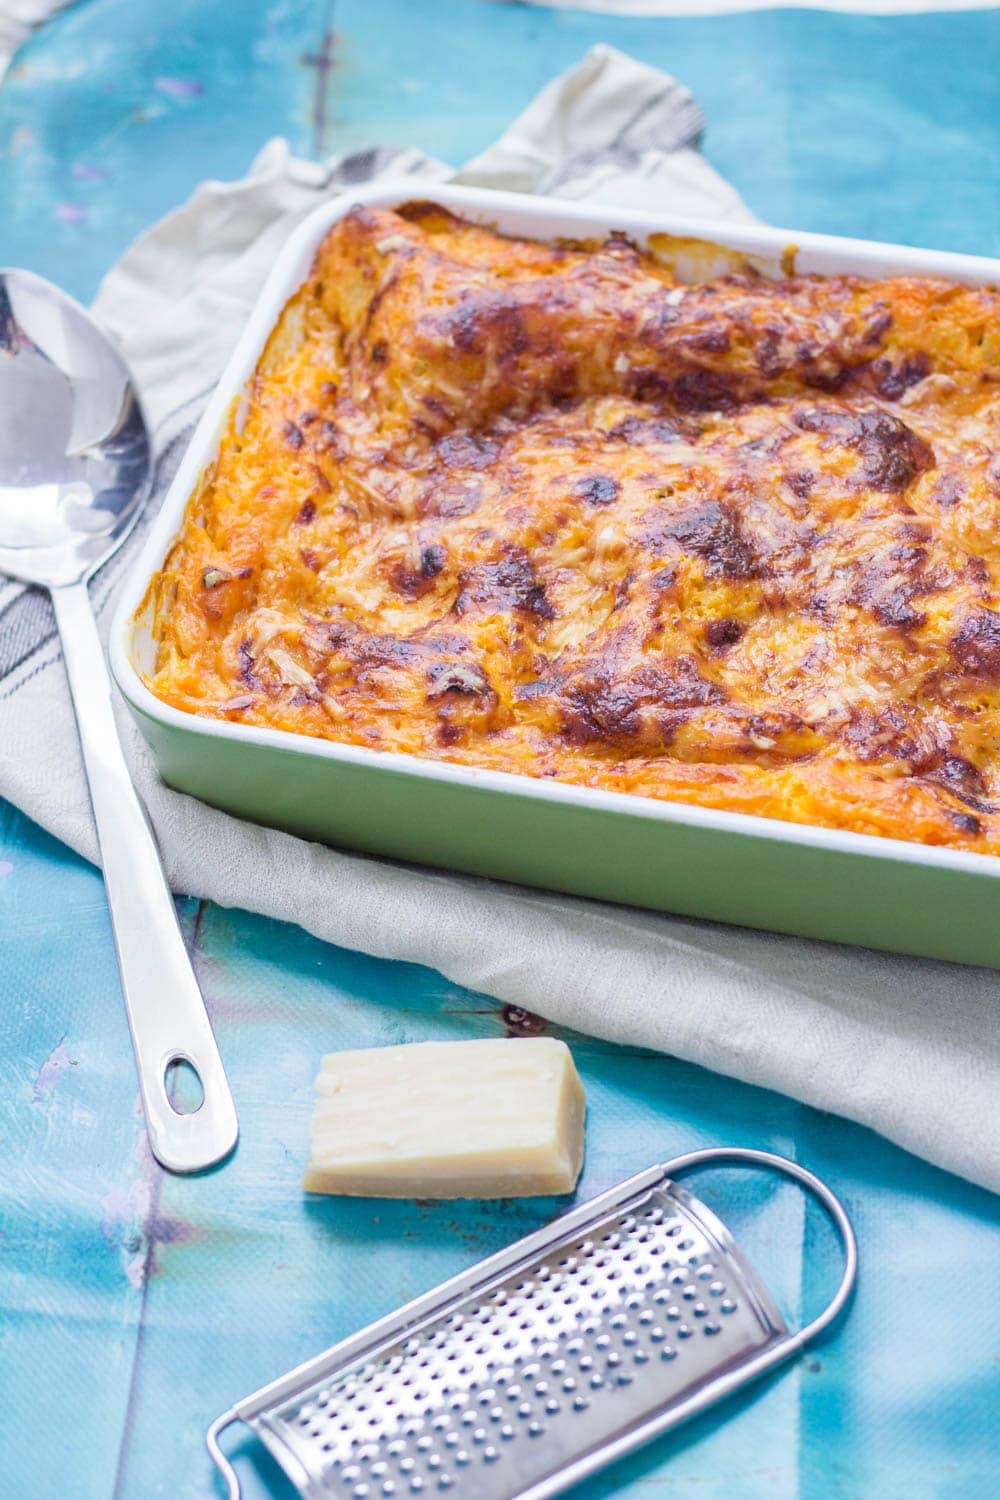 This vegetarian twist on a classic pasta dish is the perfect comfort food! This four cheese butternut squash lasagne is layered with spinach and mushrooms. #lasagne #lasagna #squash #pasta #dinner